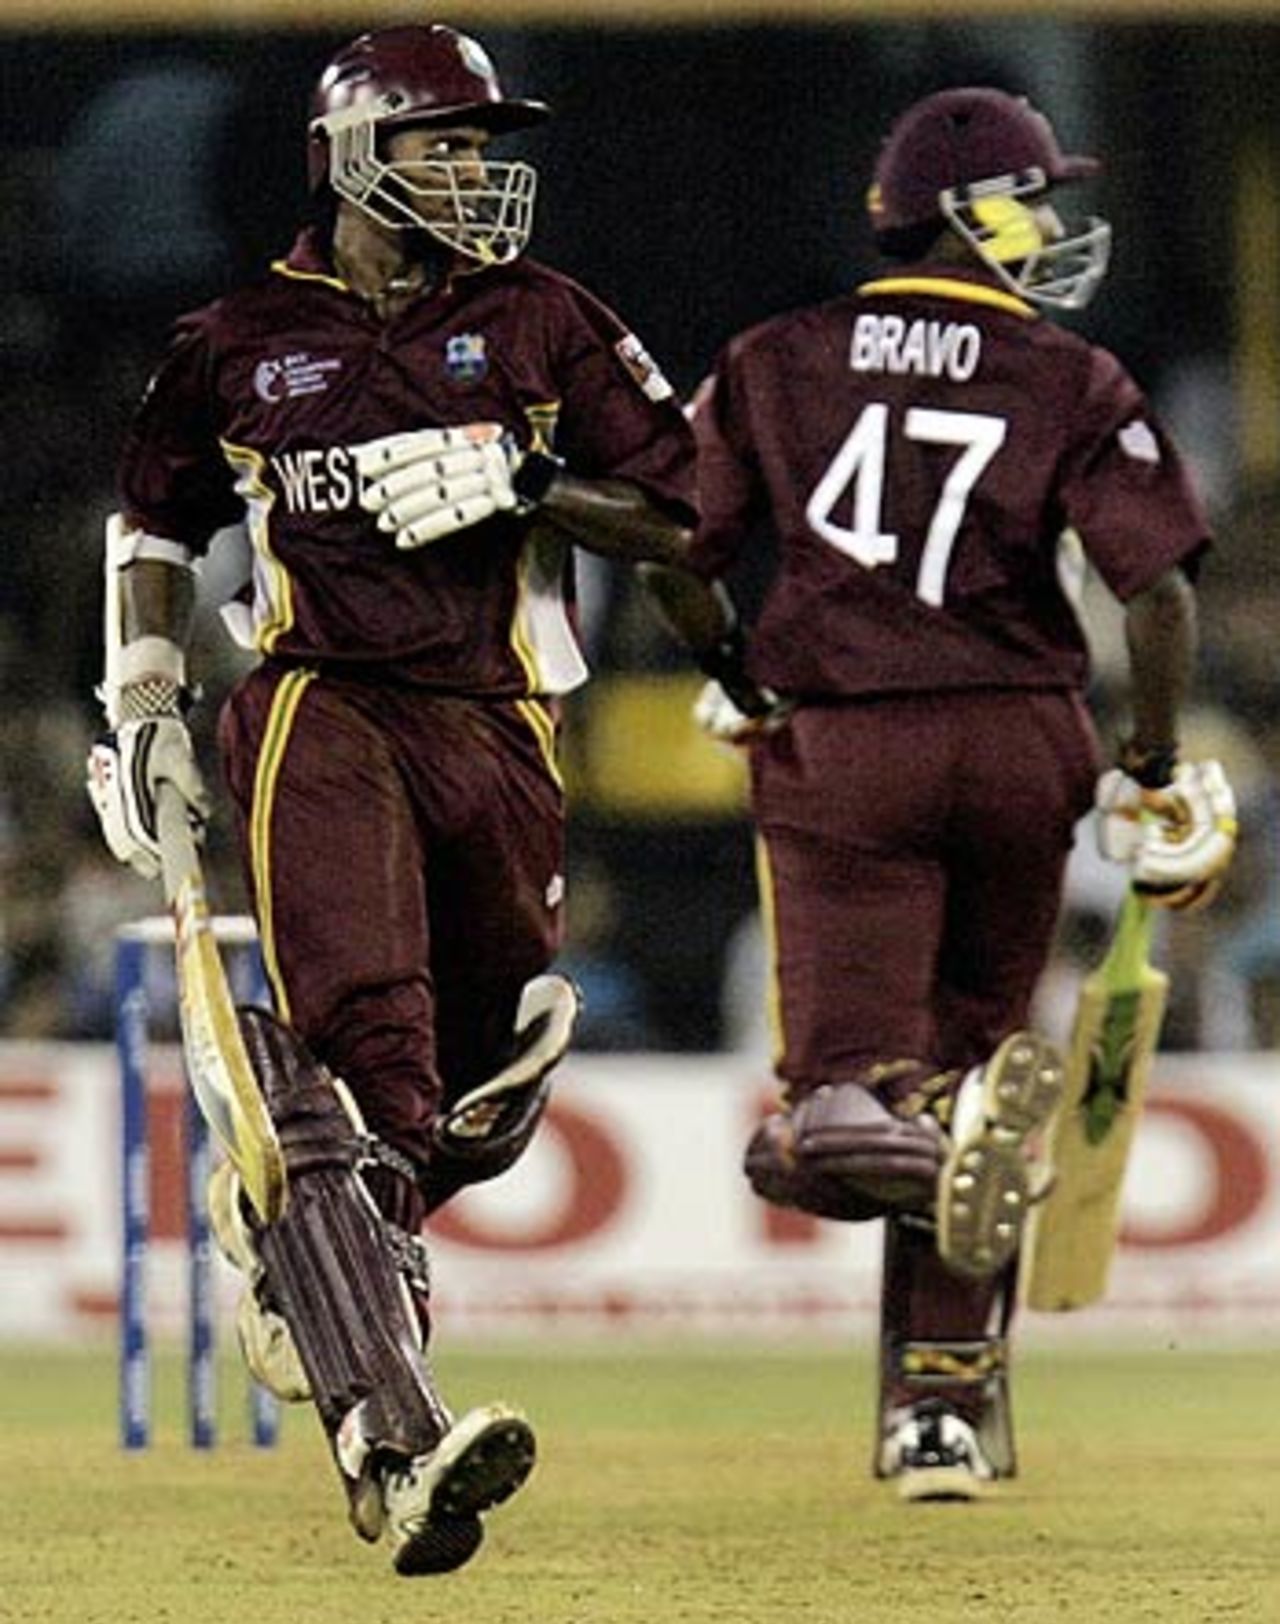 Shivnarine Chanderpaul's half-century set West Indies on course for victory, India v West Indies, Champions Trophy, 9th match, Ahmedabad, October 26, 2007